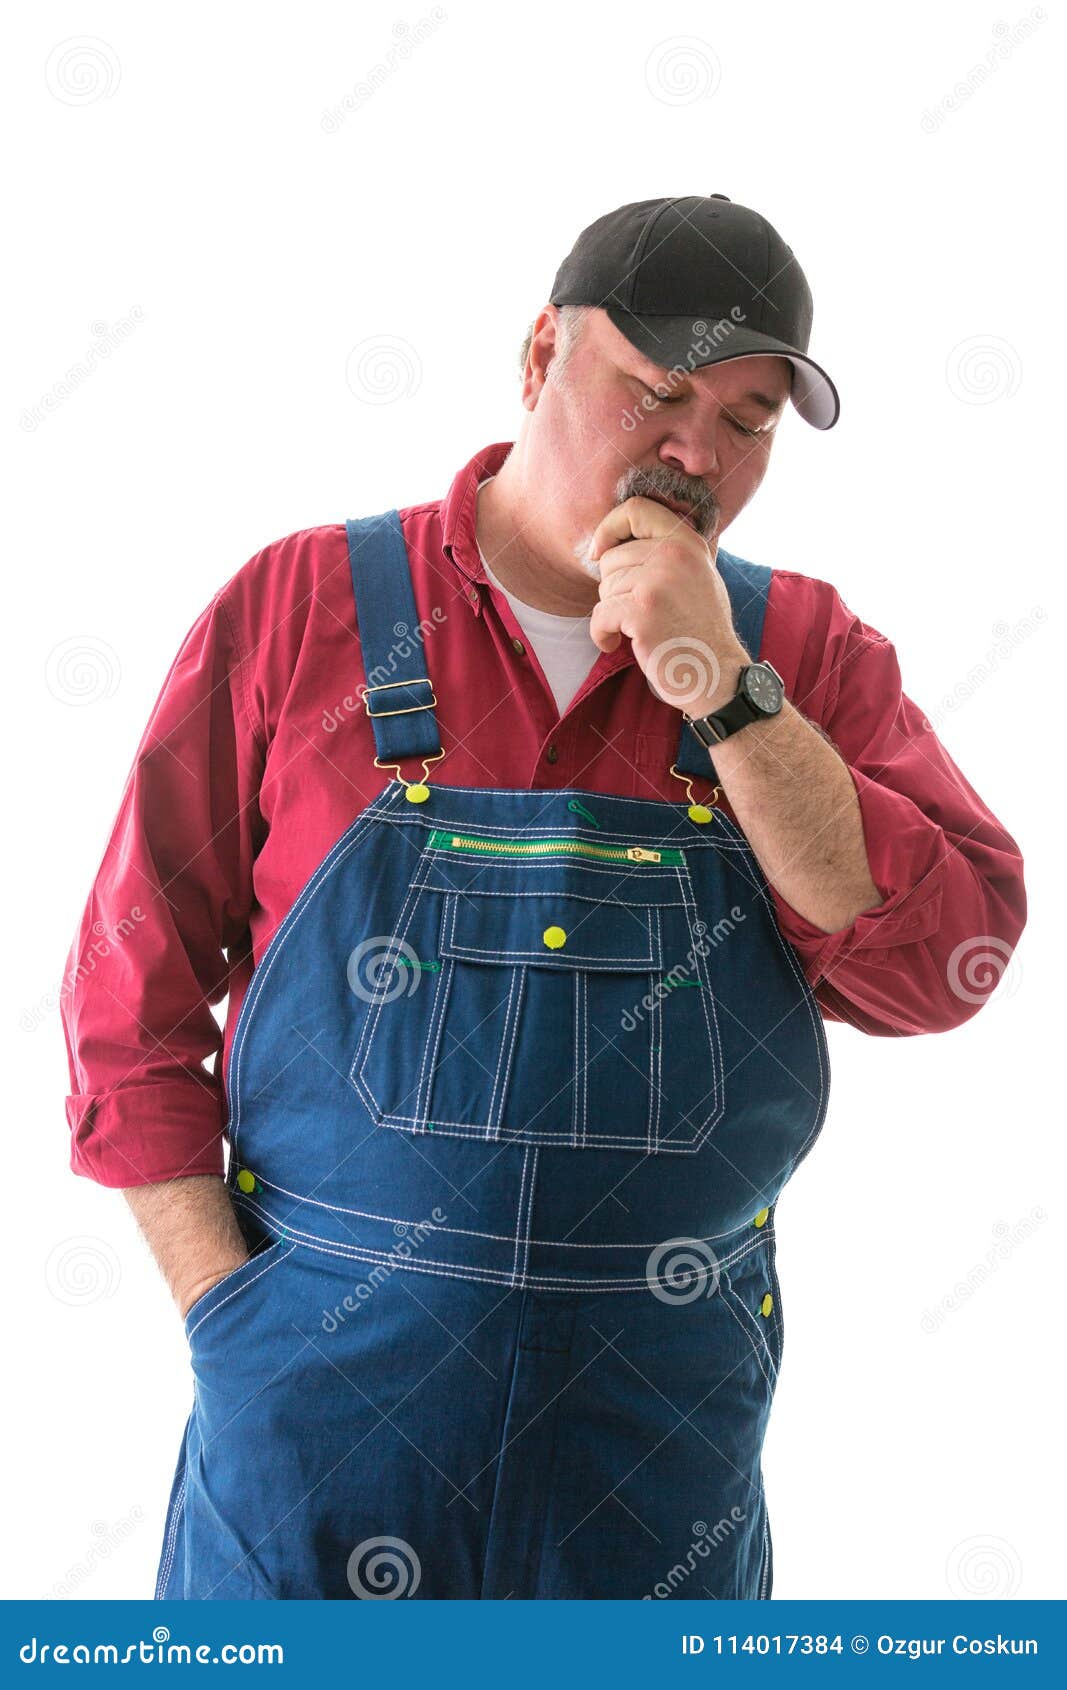 Big Man In Overalls And Cap Standing Thinking Stock Photo - Image ...